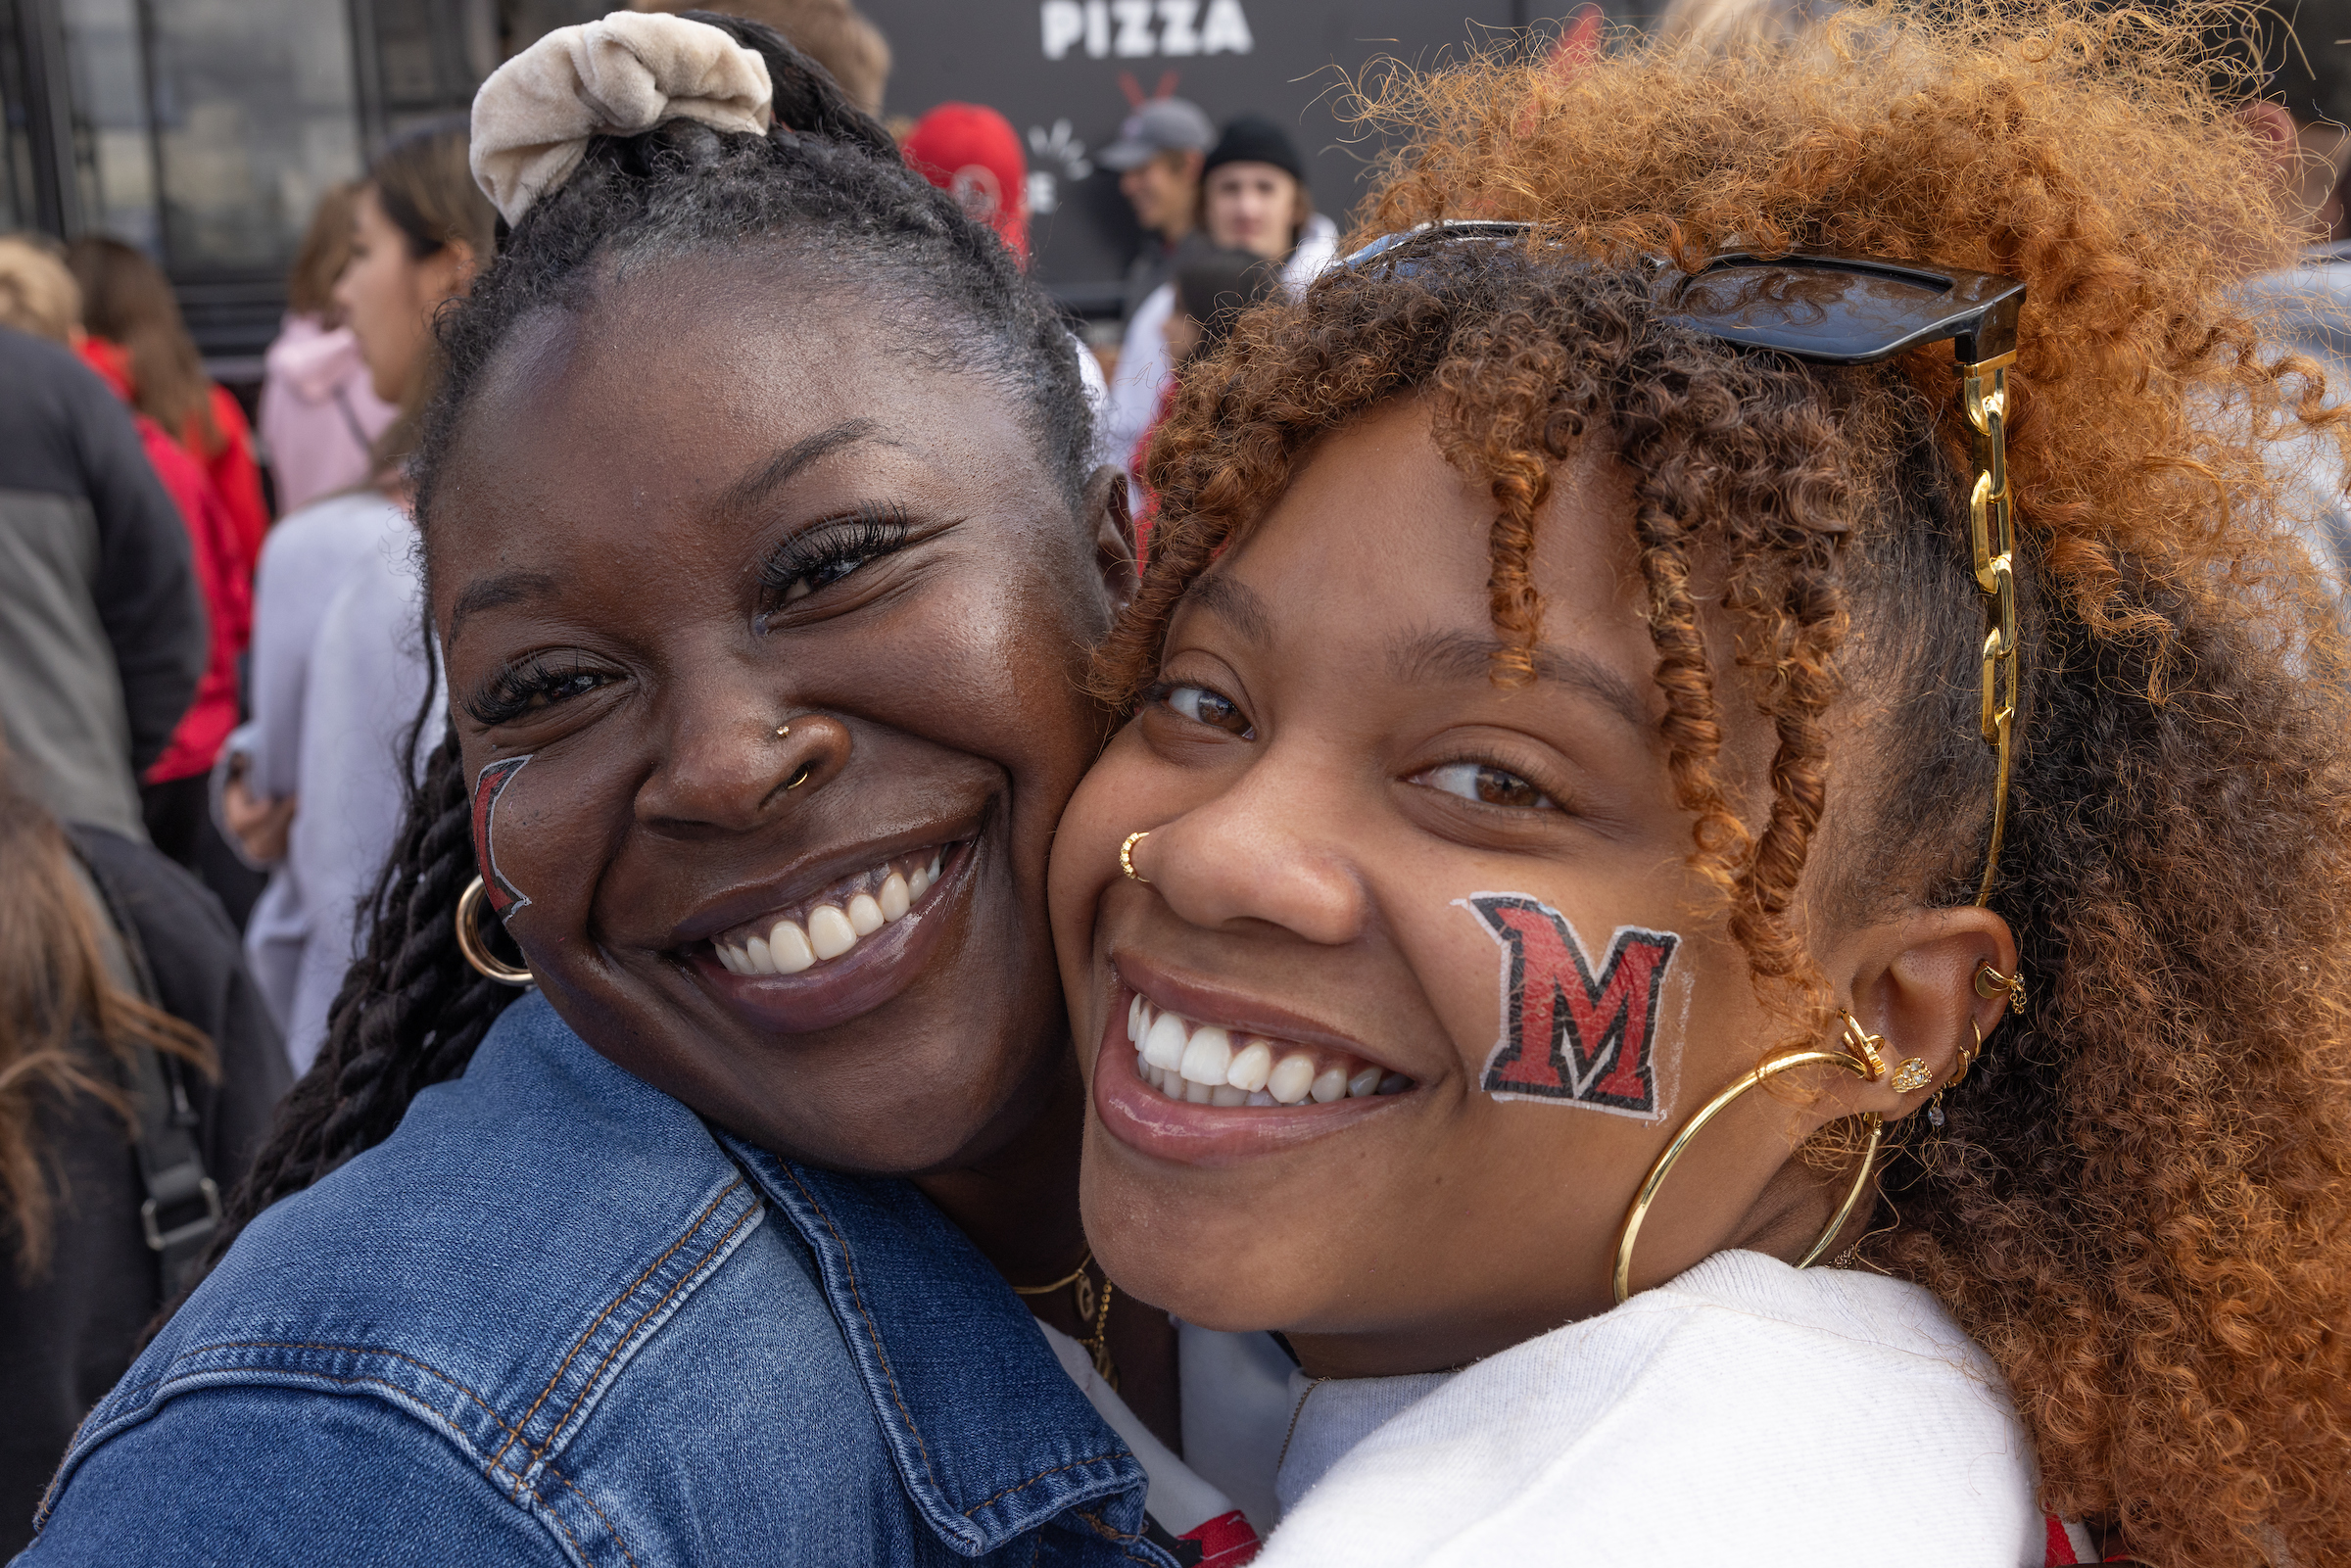 A student and parent pose for a picture, each with a Miami M temporary tattoo on their cheek.